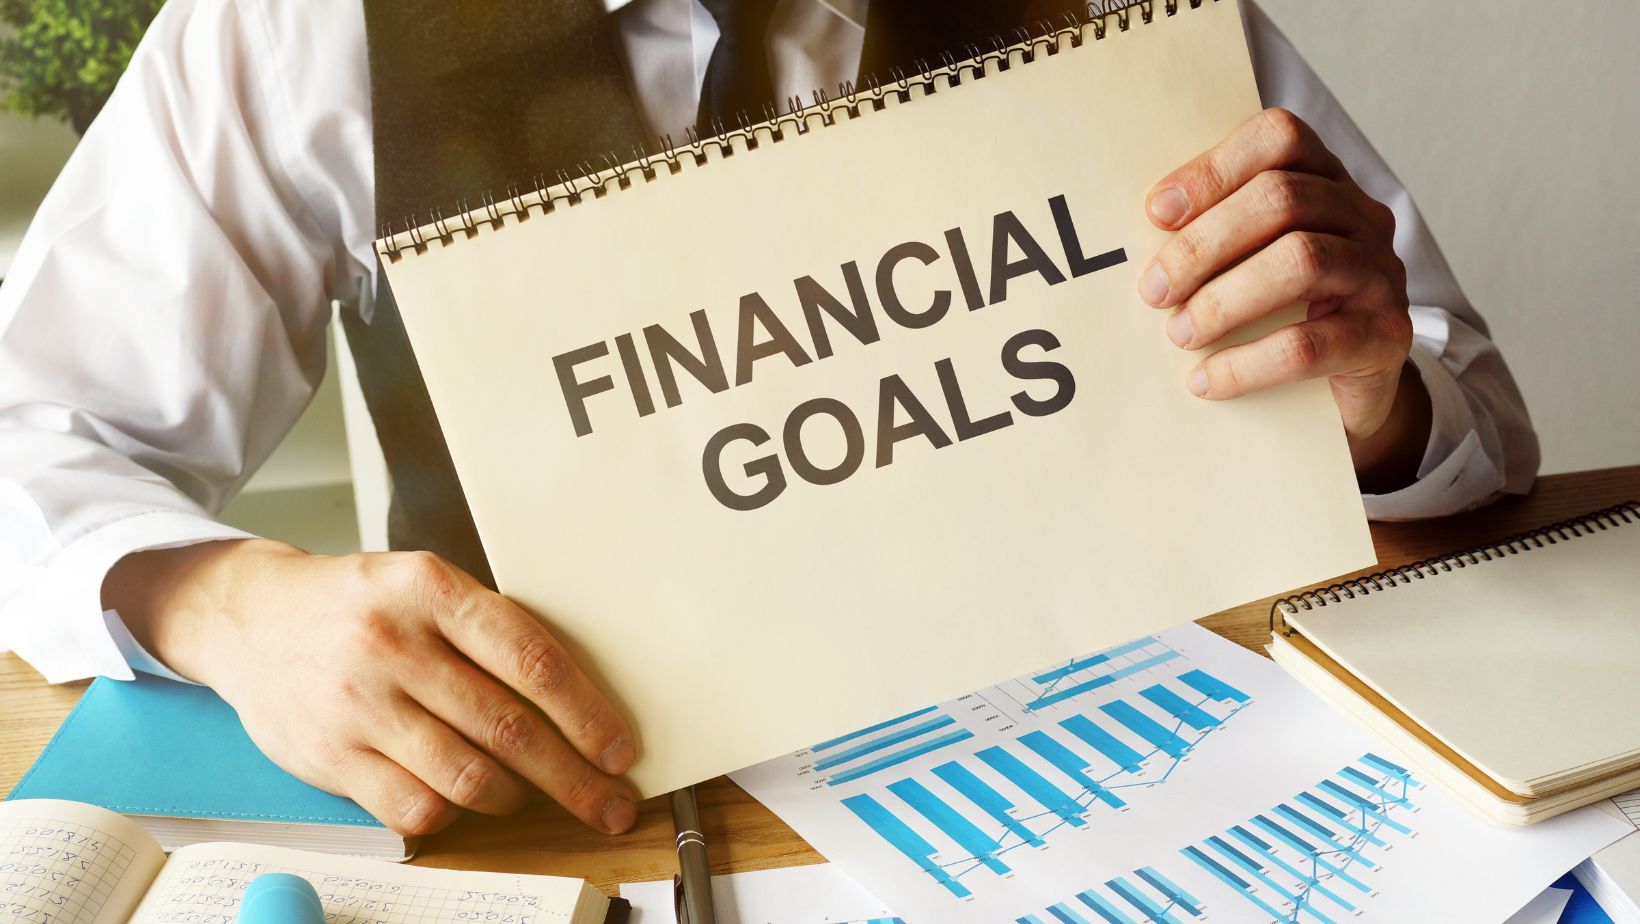 what is true about the way you should approach financial goals across different stages of your life?